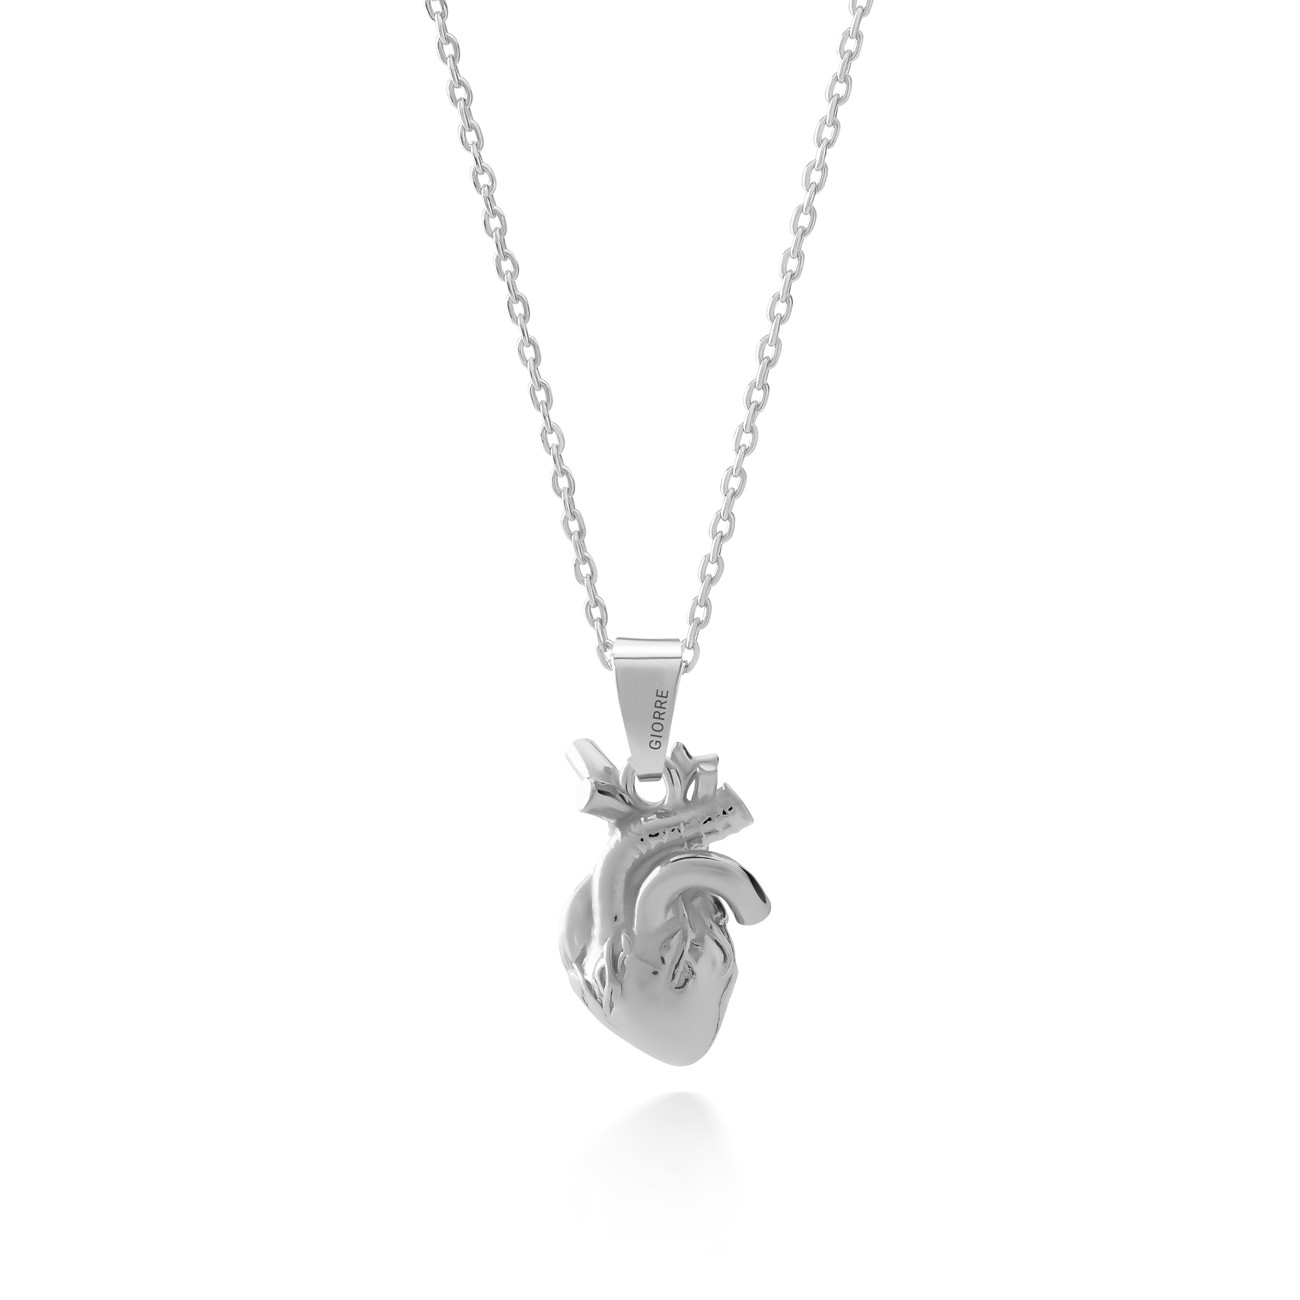 Human heart necklace 925